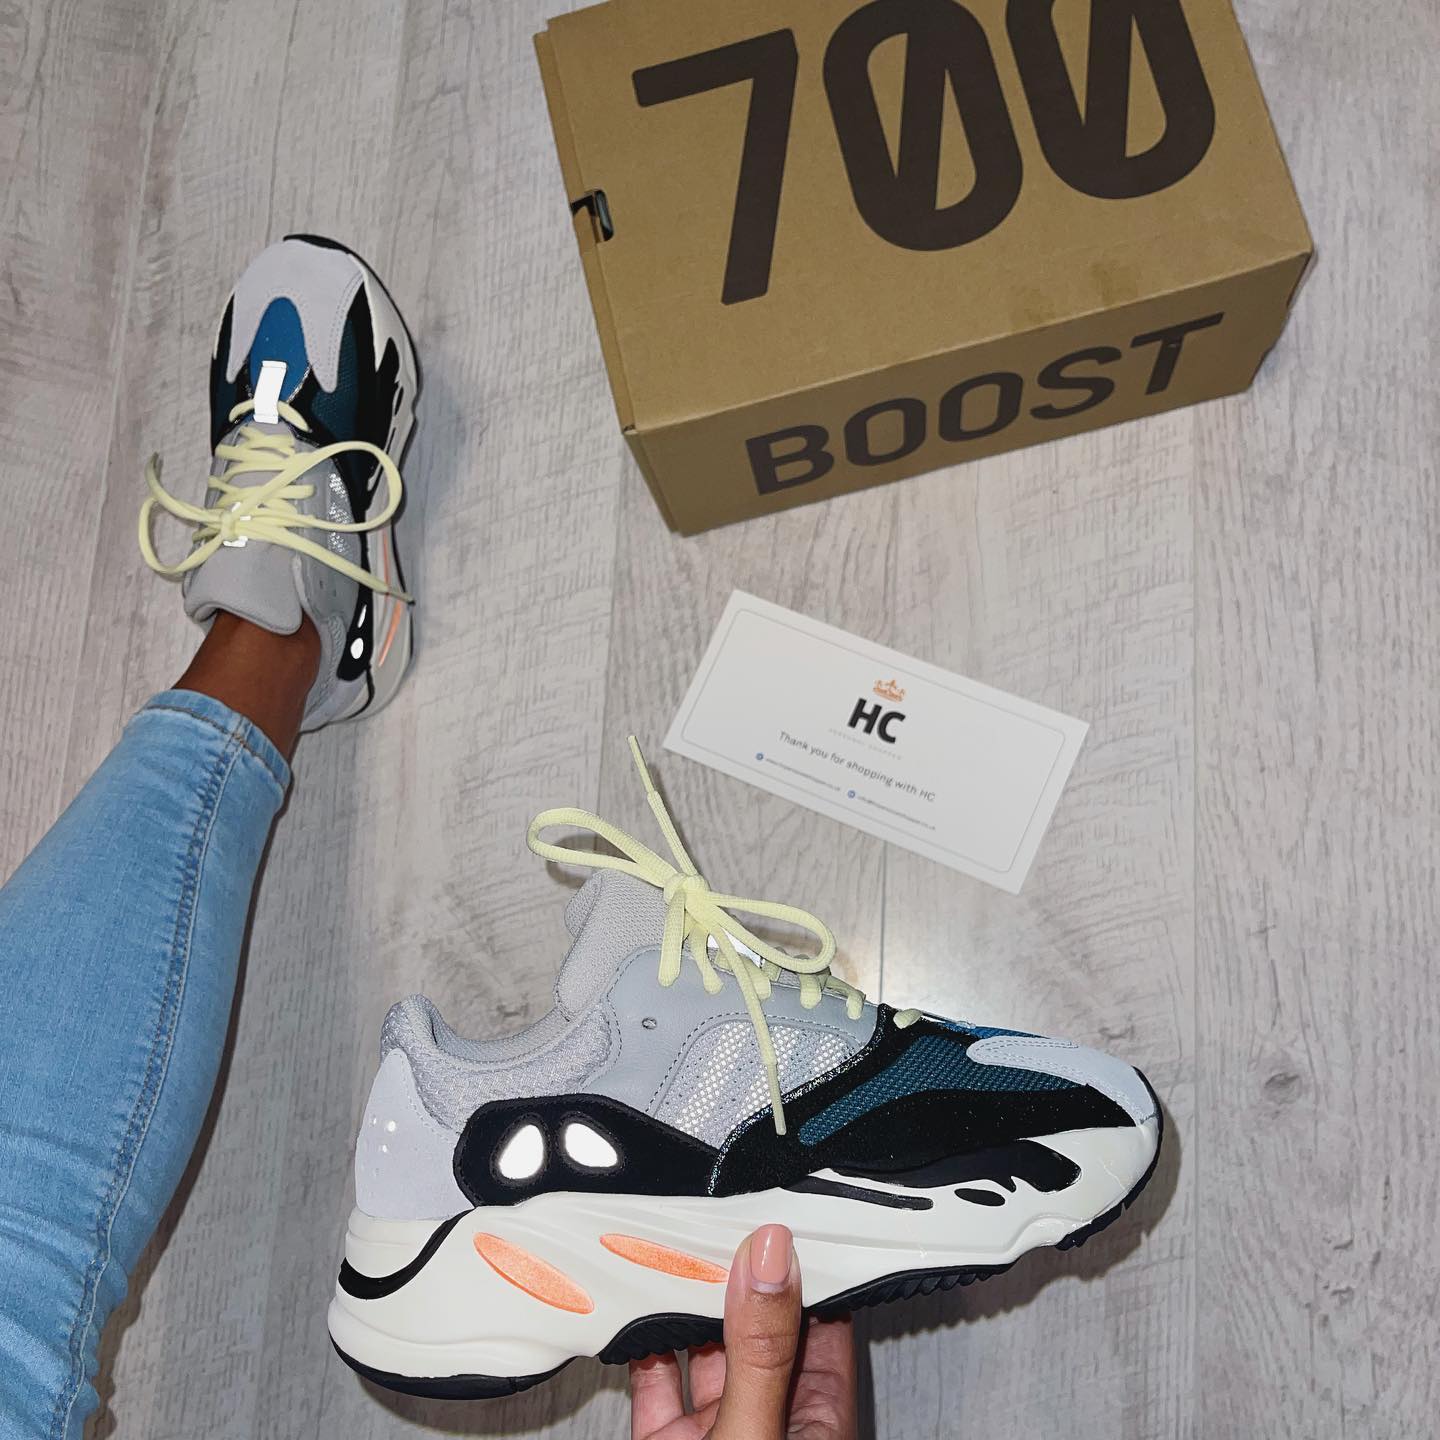 Adidas Yeezy Boost 700 Sneakers Shoes